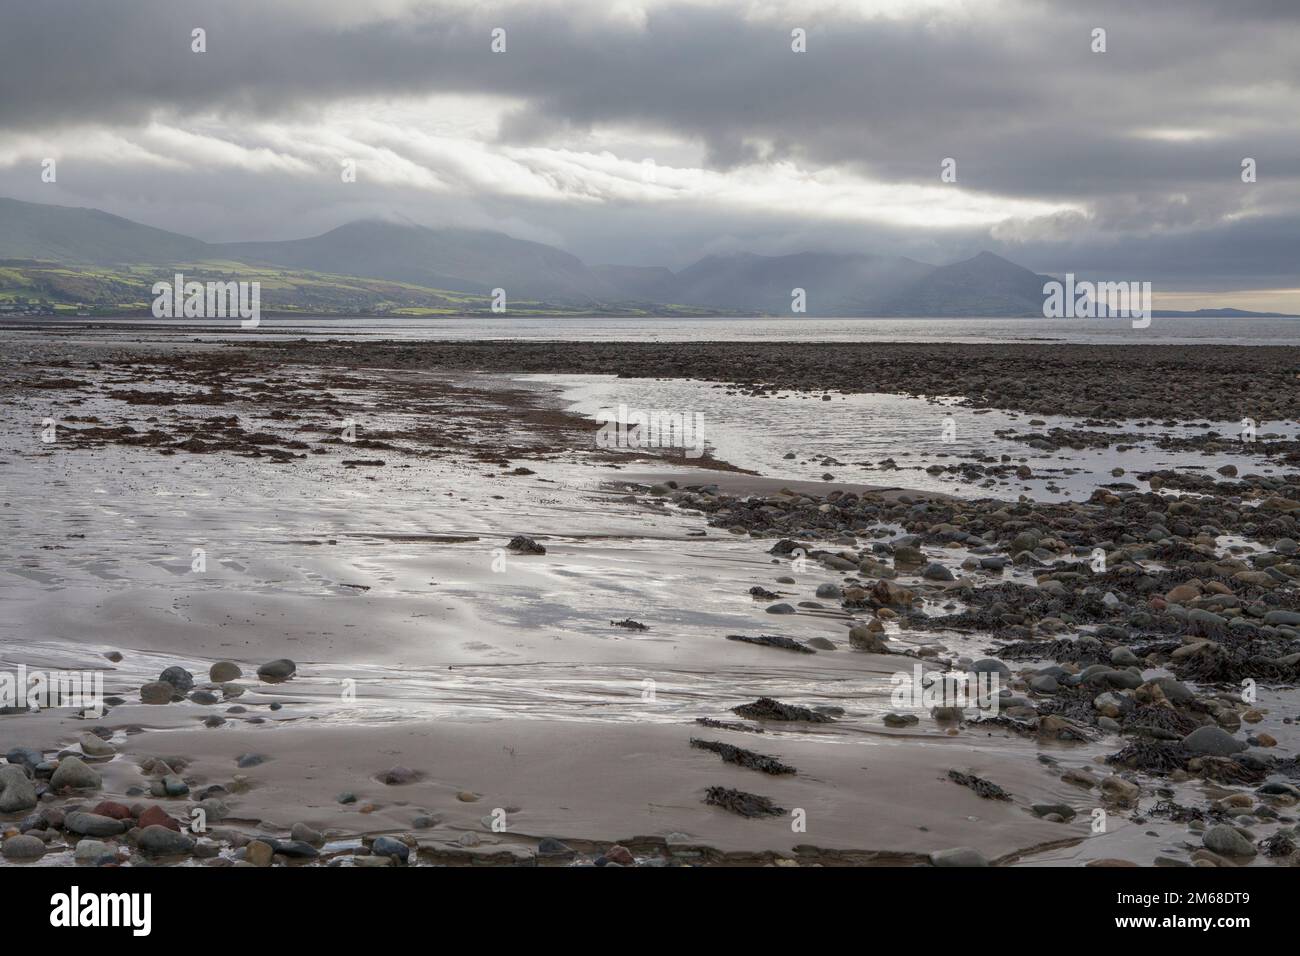 The view to the Llyn Peninsula from Dinas Dinlle beach in Llandwrog, Wales Stock Photo